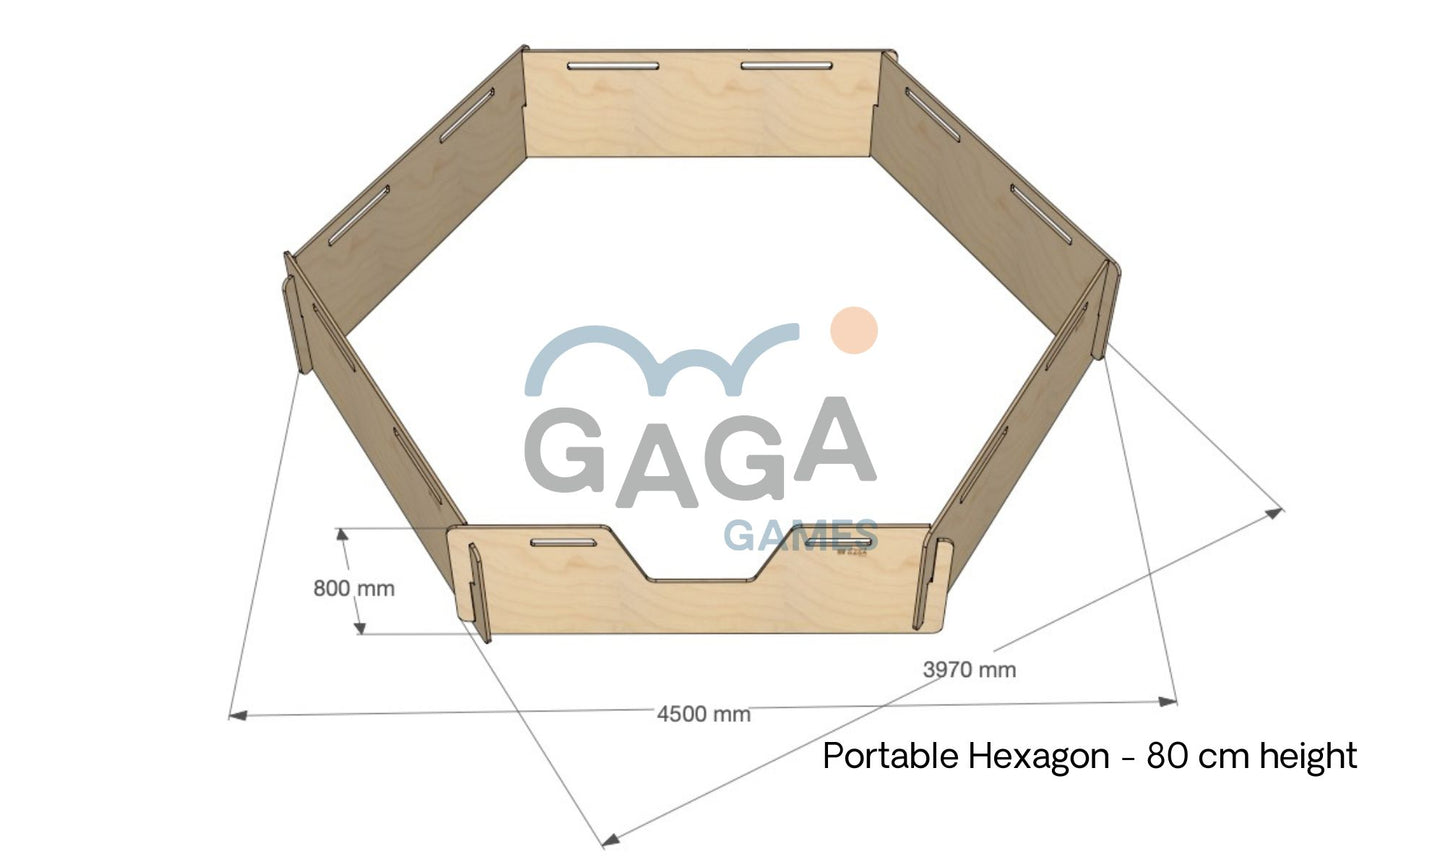 The size information of our 80cm Hexagonal Portable Gaga Pit. Perfect for indoor/outdoor play and events.